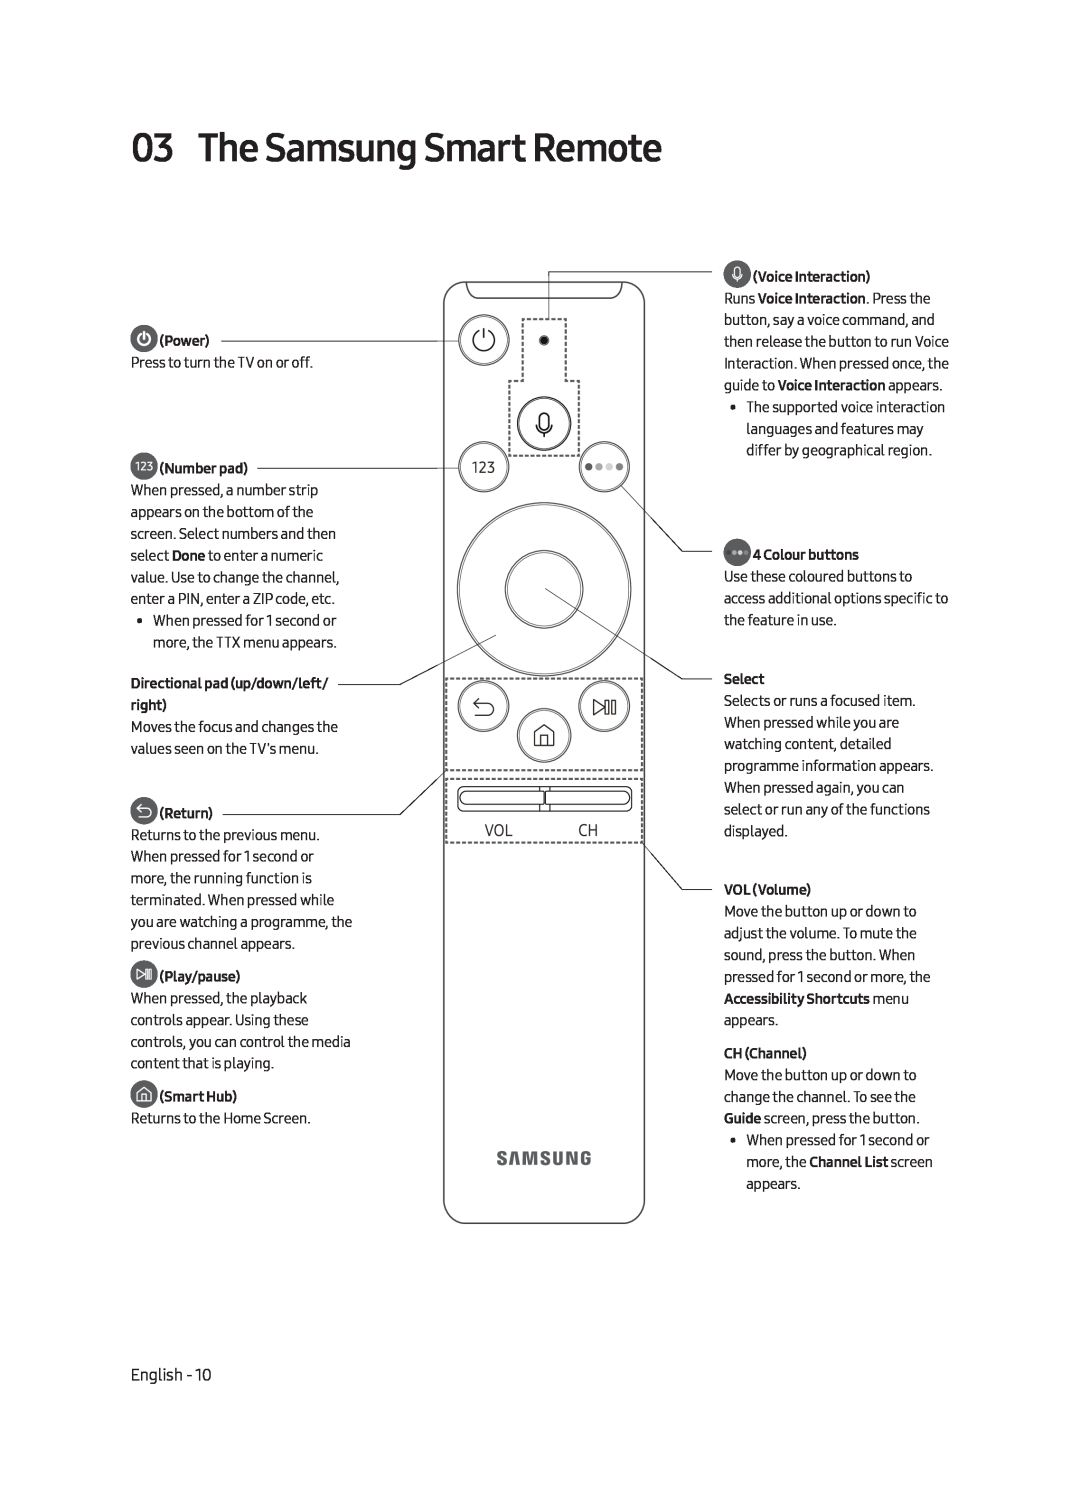 Samsung UE40MU6170UXZG manual The Samsung Smart Remote, Power, Number pad, Directional pad up/down/left/ right, Play/pause 